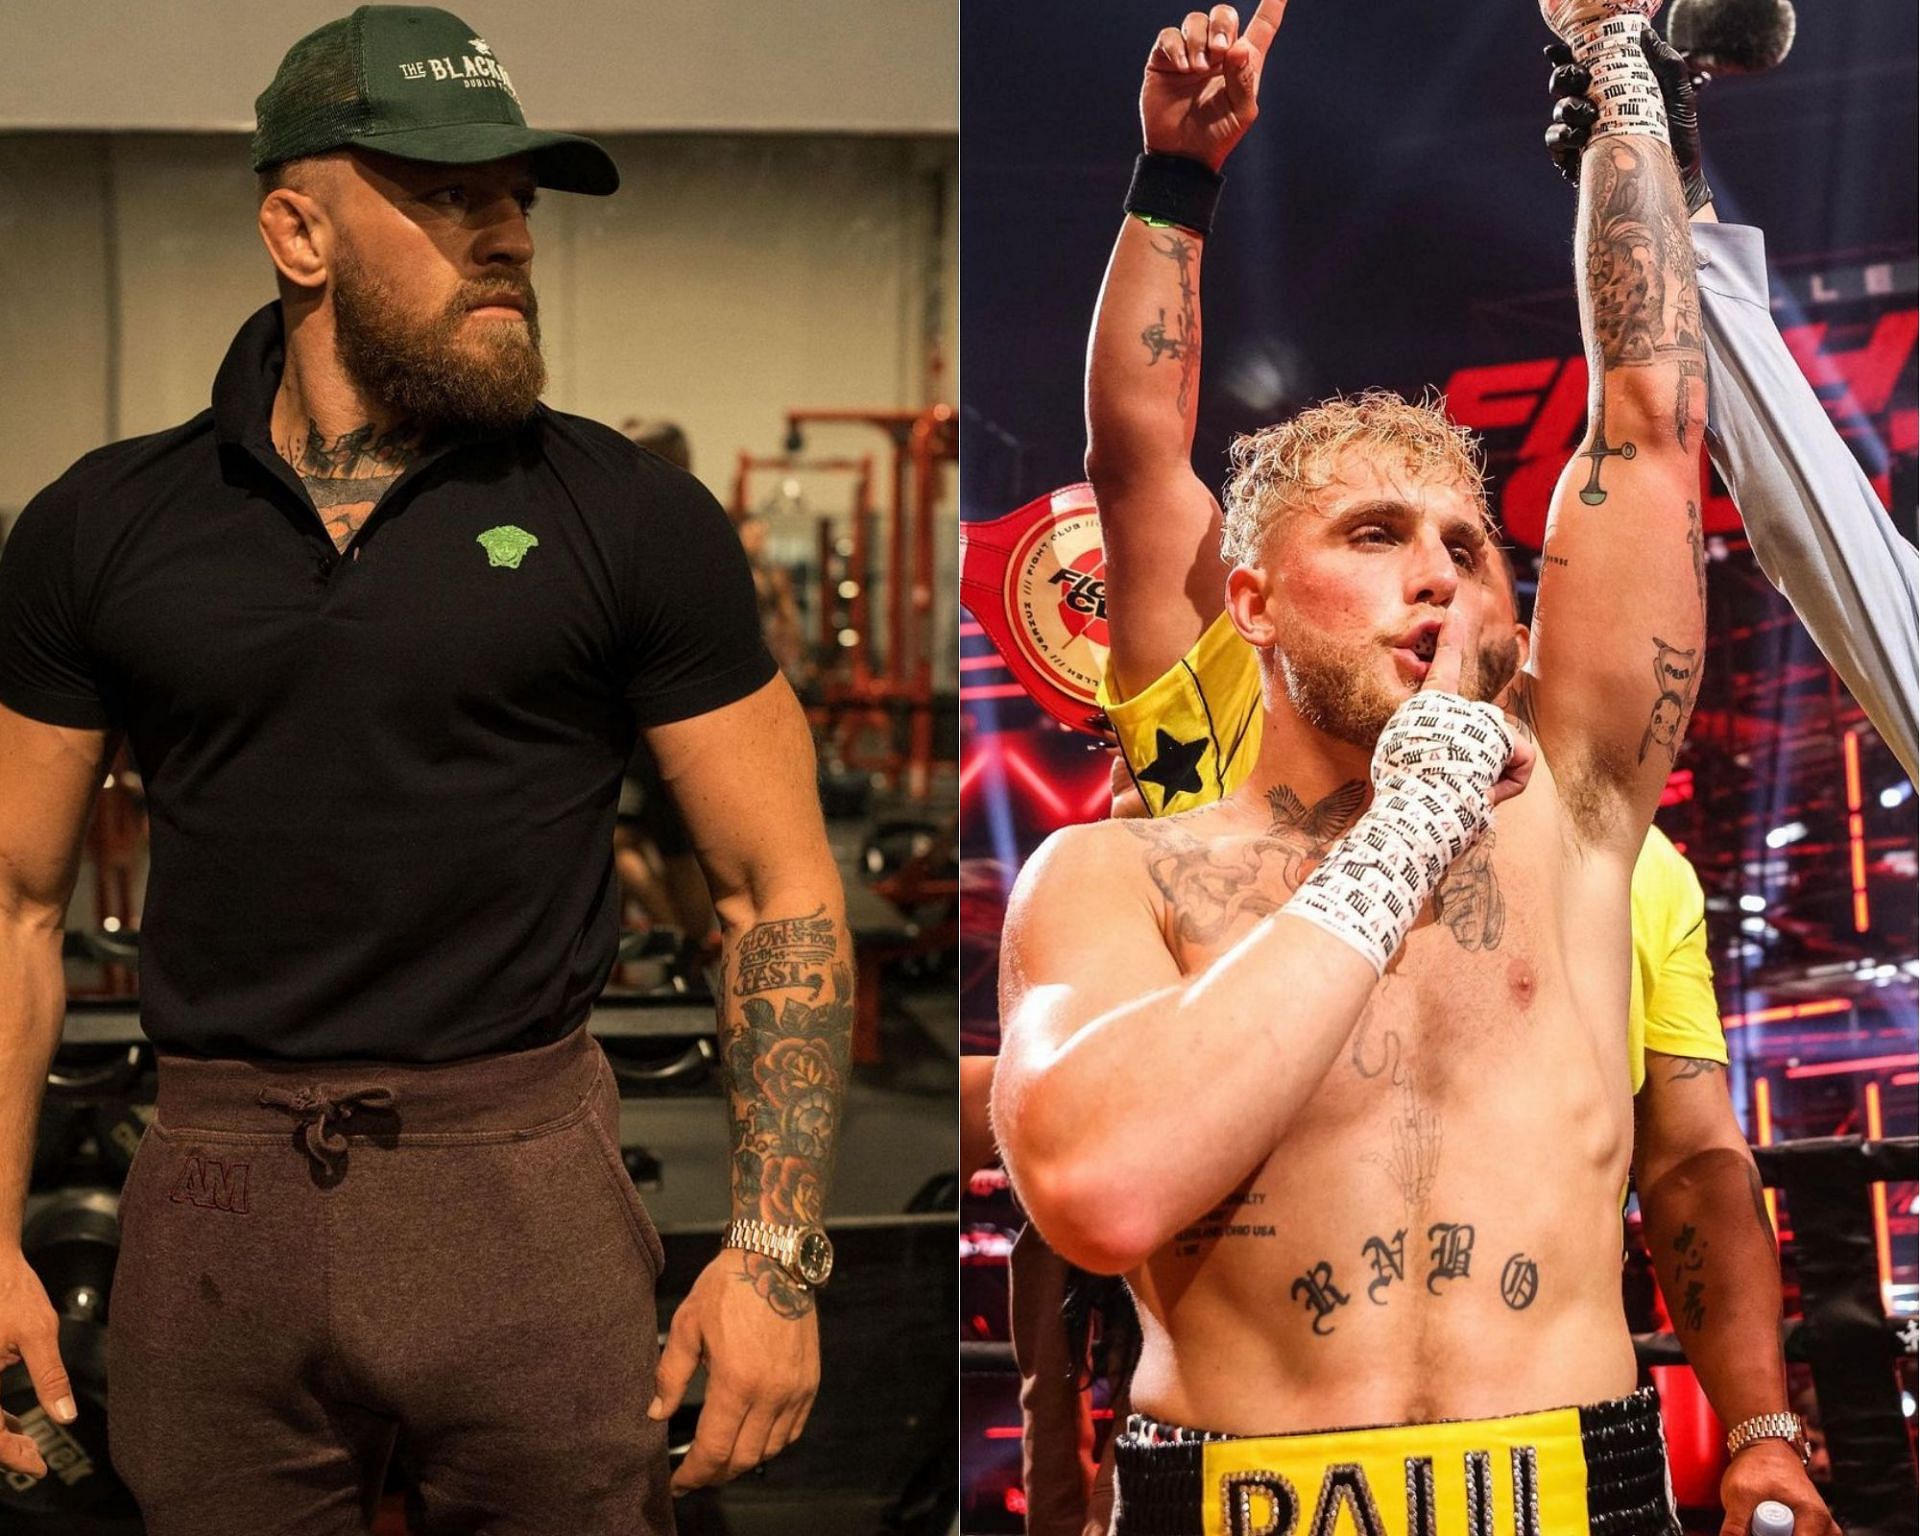 McGregor (left) and Paul (right) [ Image credits: @thenotoriousmma and @jakepaul on Instagram]